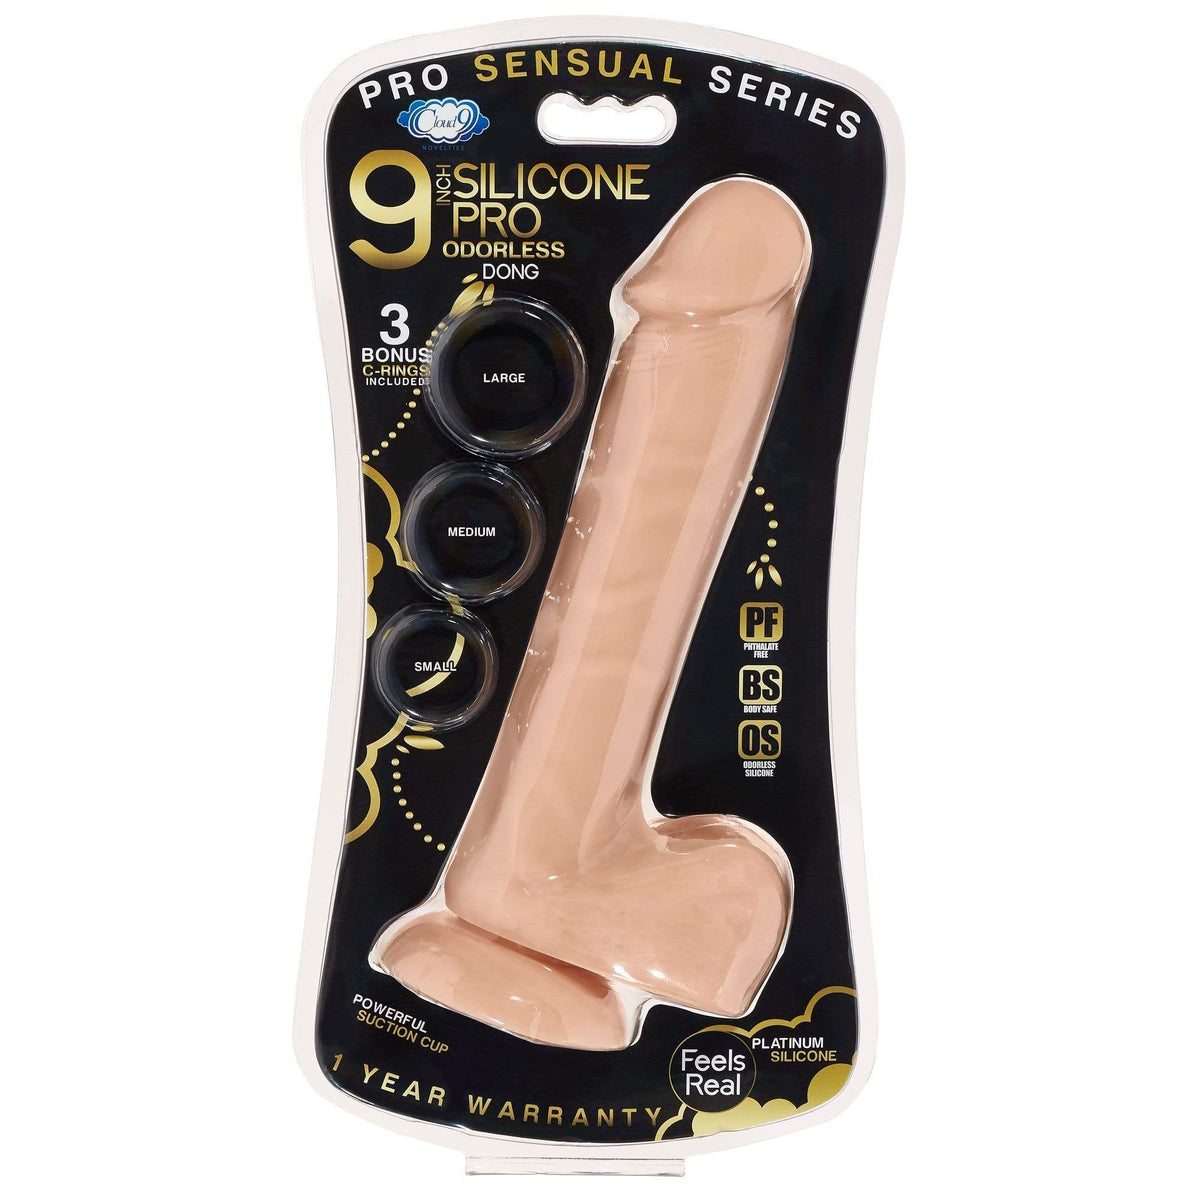 9 silicone pro odorless dong flesh